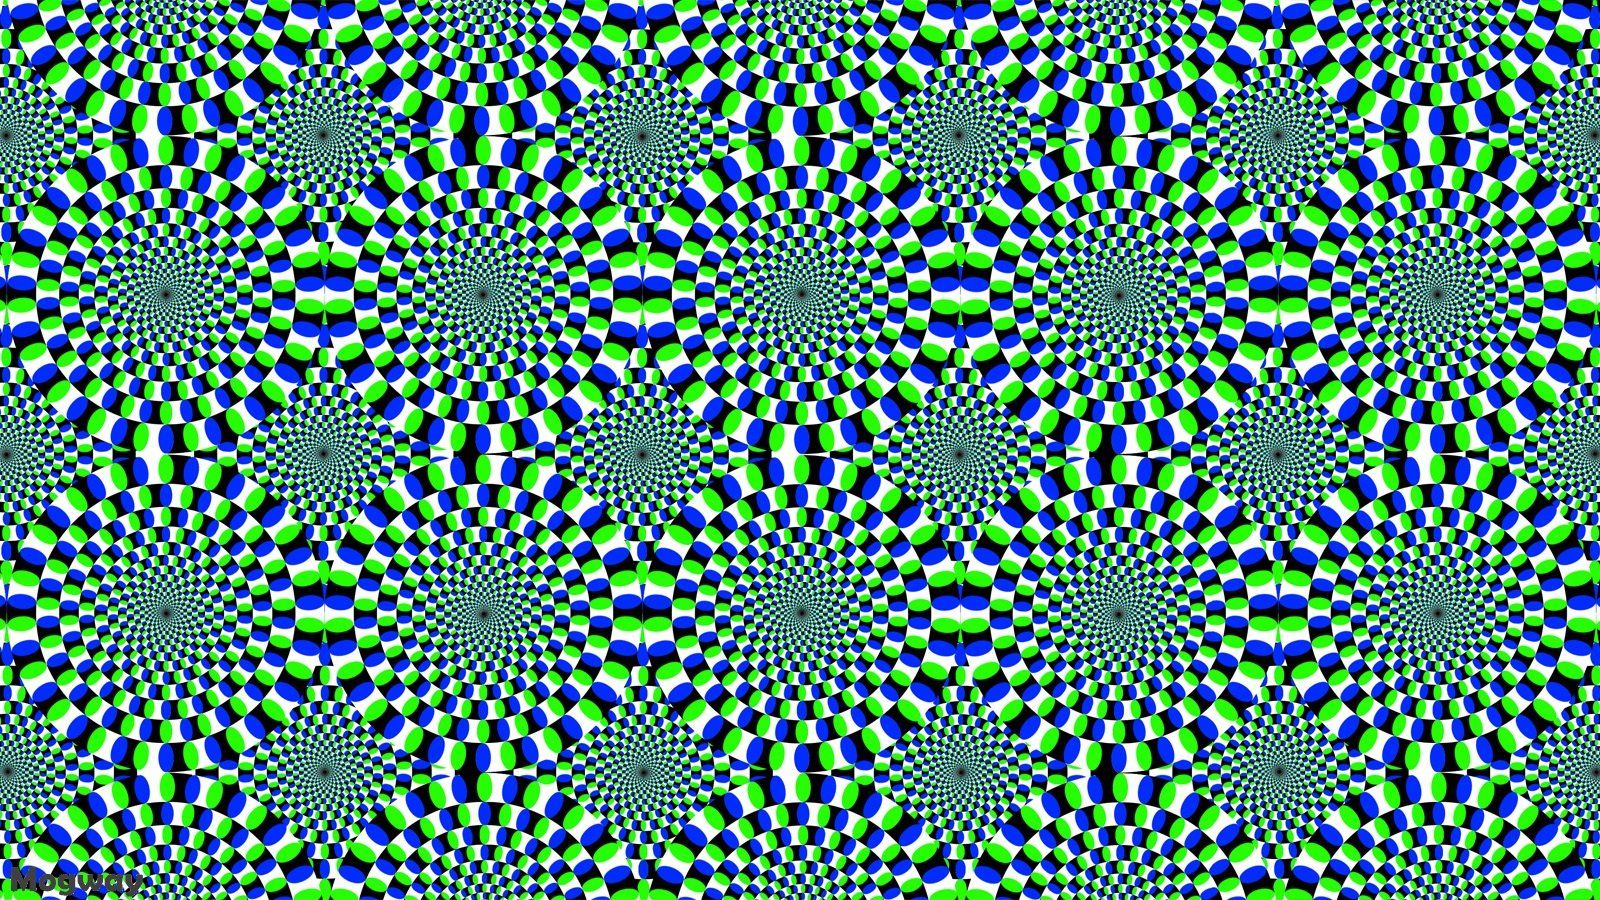 48+ Moving Optical Illusion Wallpapers.